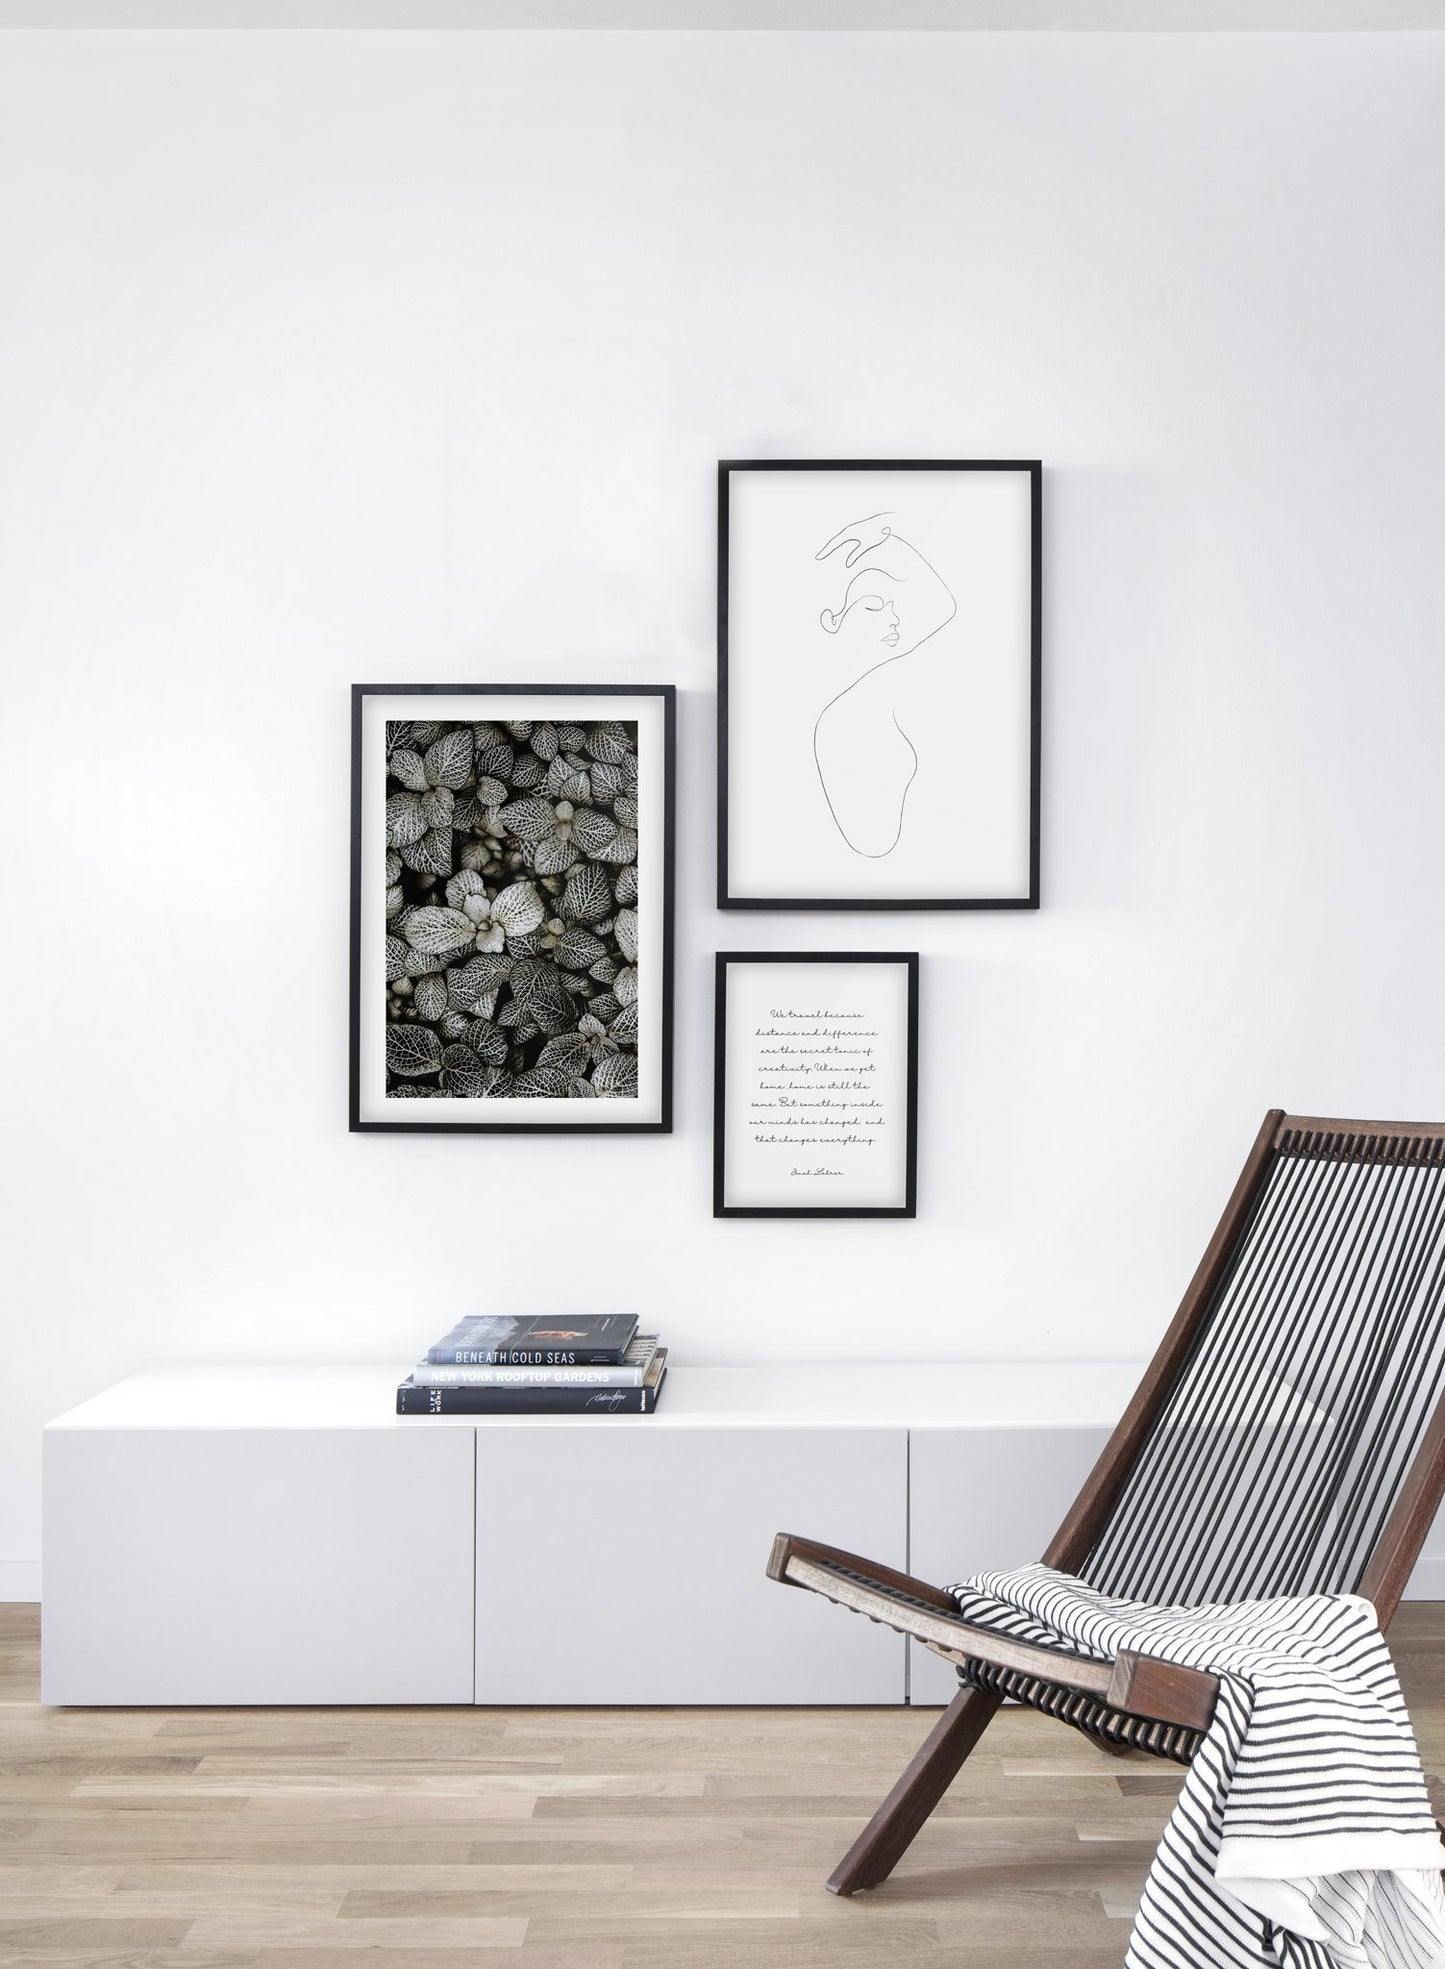 Modern minimalist poster by Opposite Wall with abstract illustration of woman line art - Gallery Wall trio - Living Room